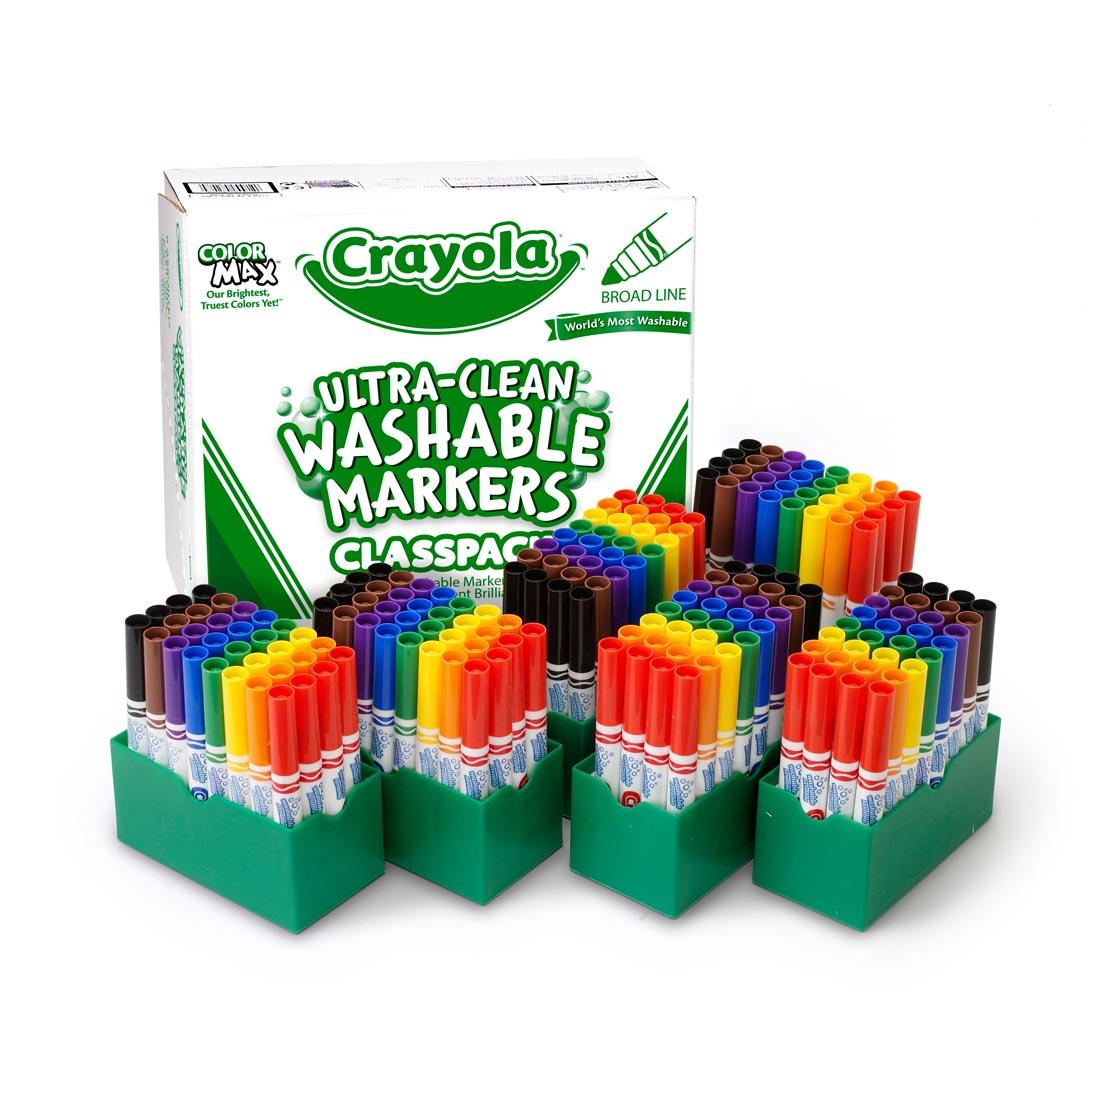 Crayola Ultra-Clean Washable Broad Line Markers 192-Count Classpack